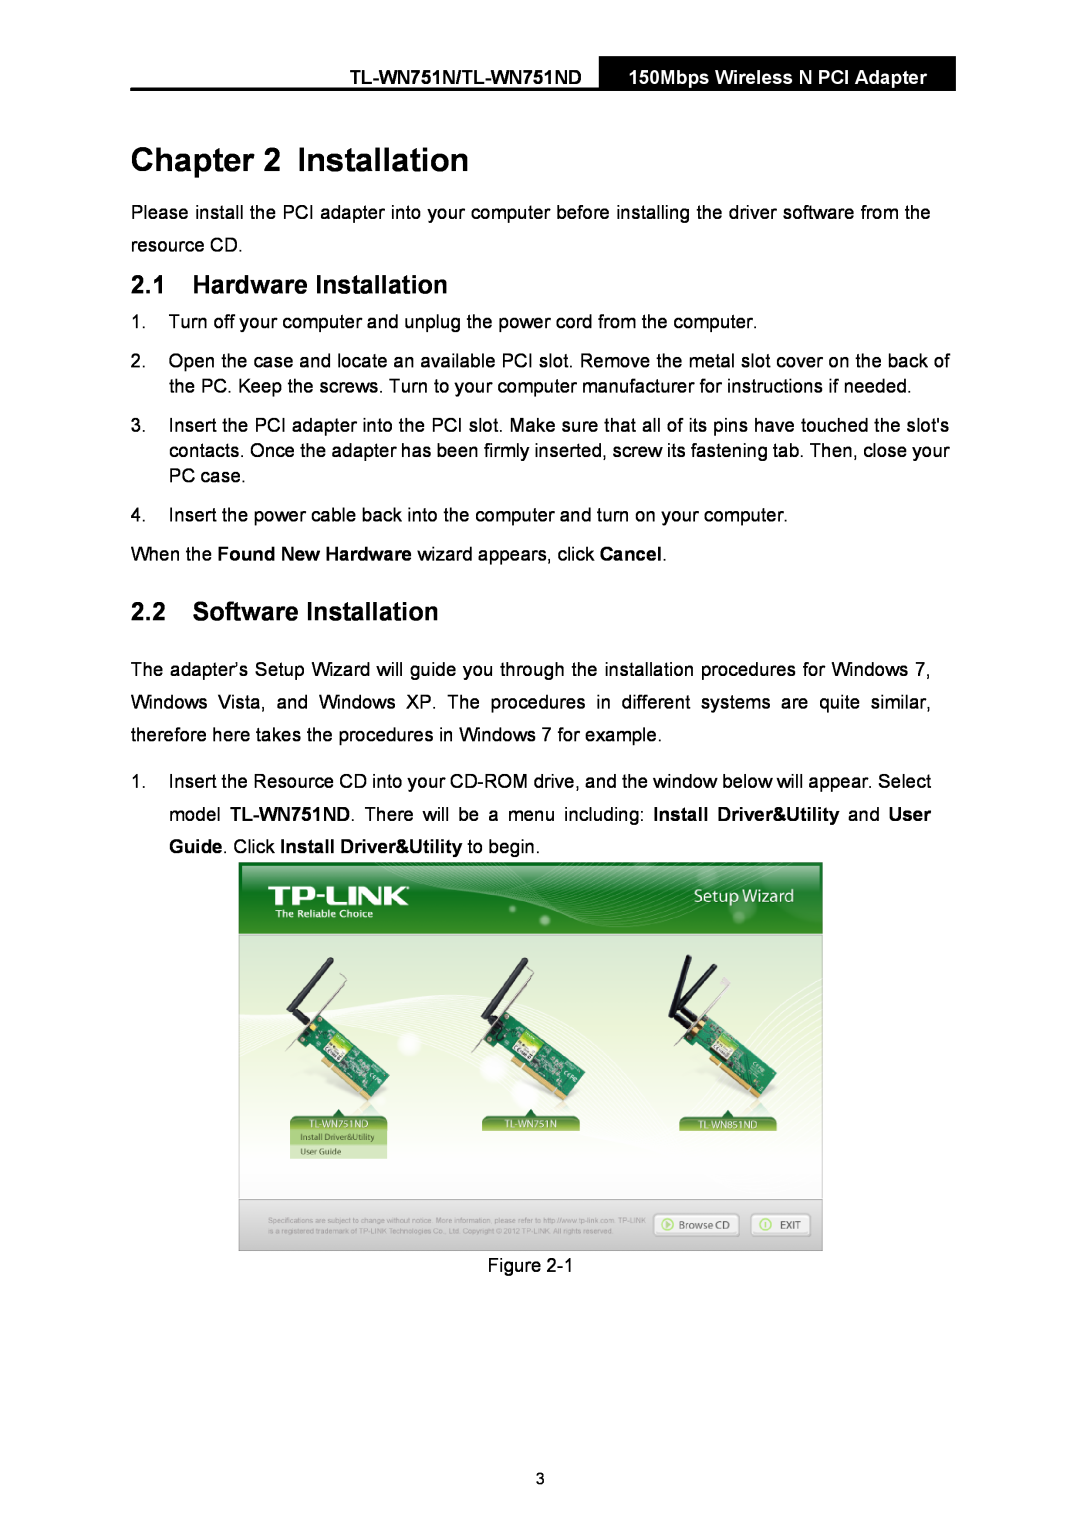 TP-Link manual Hardware Installation, Software Installation, TL-WN751N/TL-WN751ND, 150Mbps Wireless N PCI Adapter 